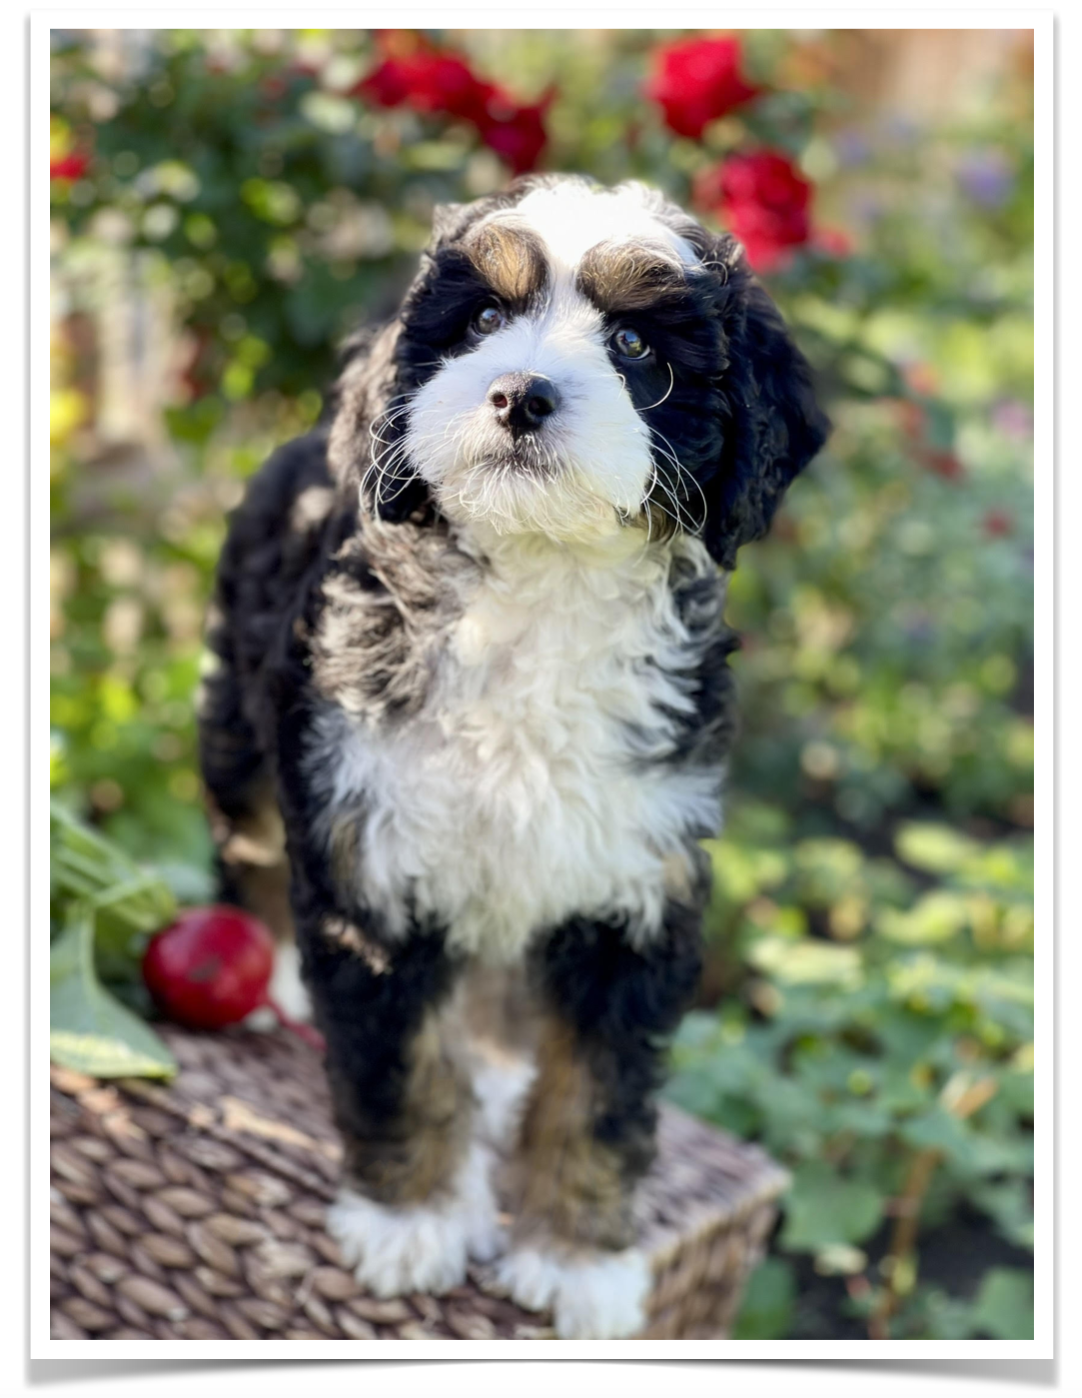 A tri-color Bernedoodle puppy from a bernedoodle breeder near Los Angeles California